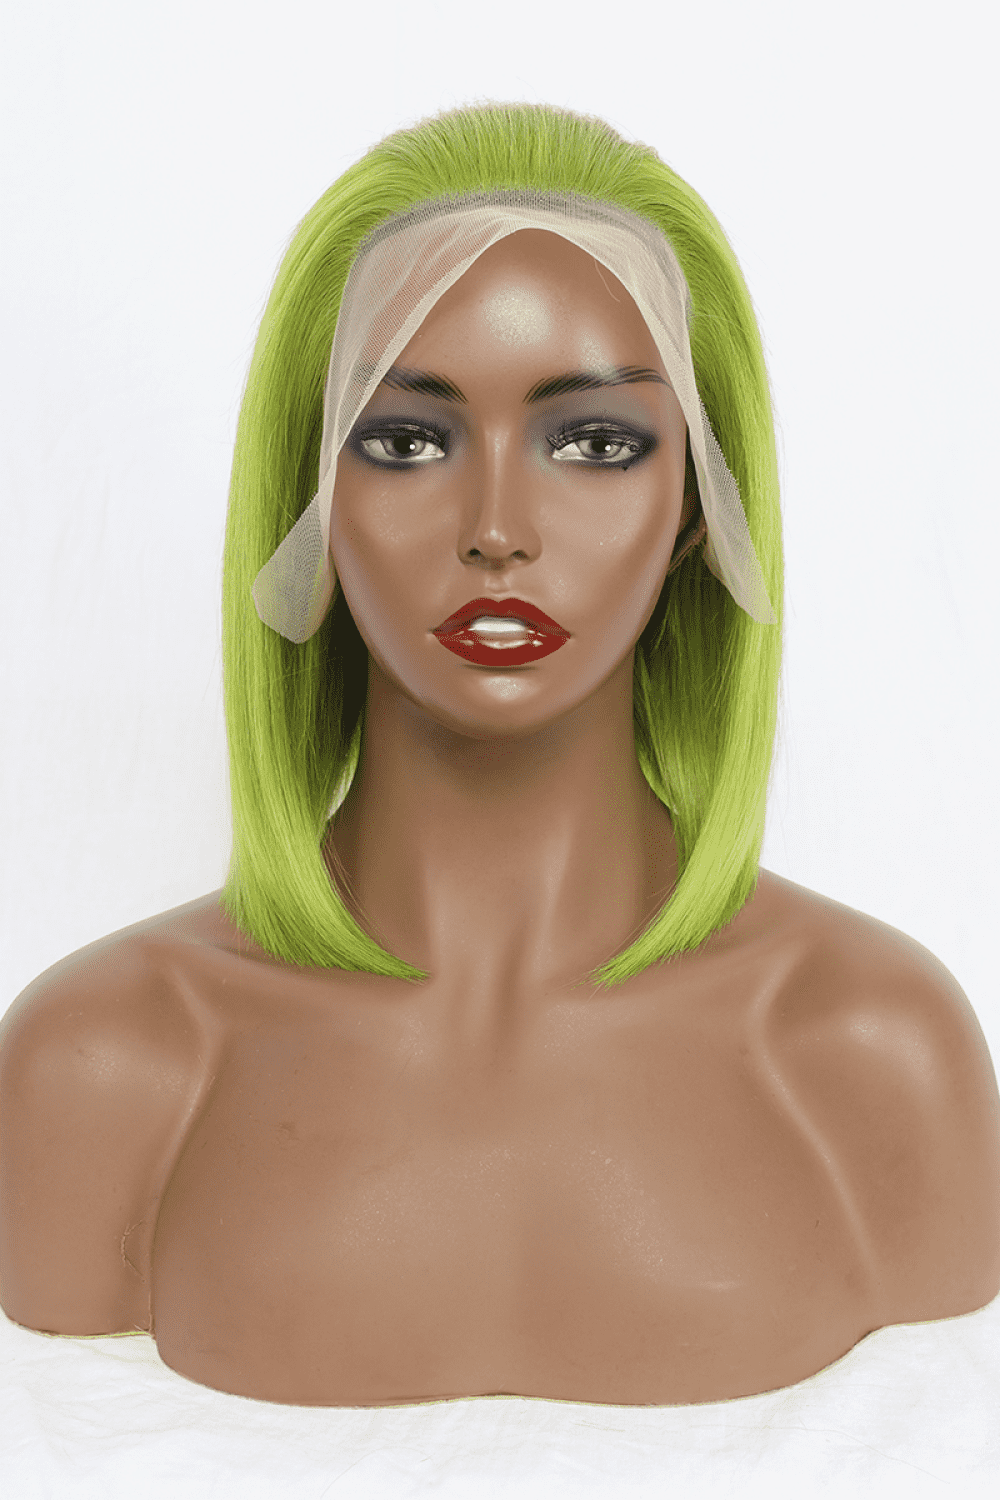 Lace Front Bobo Wigs Human Hair in Lime